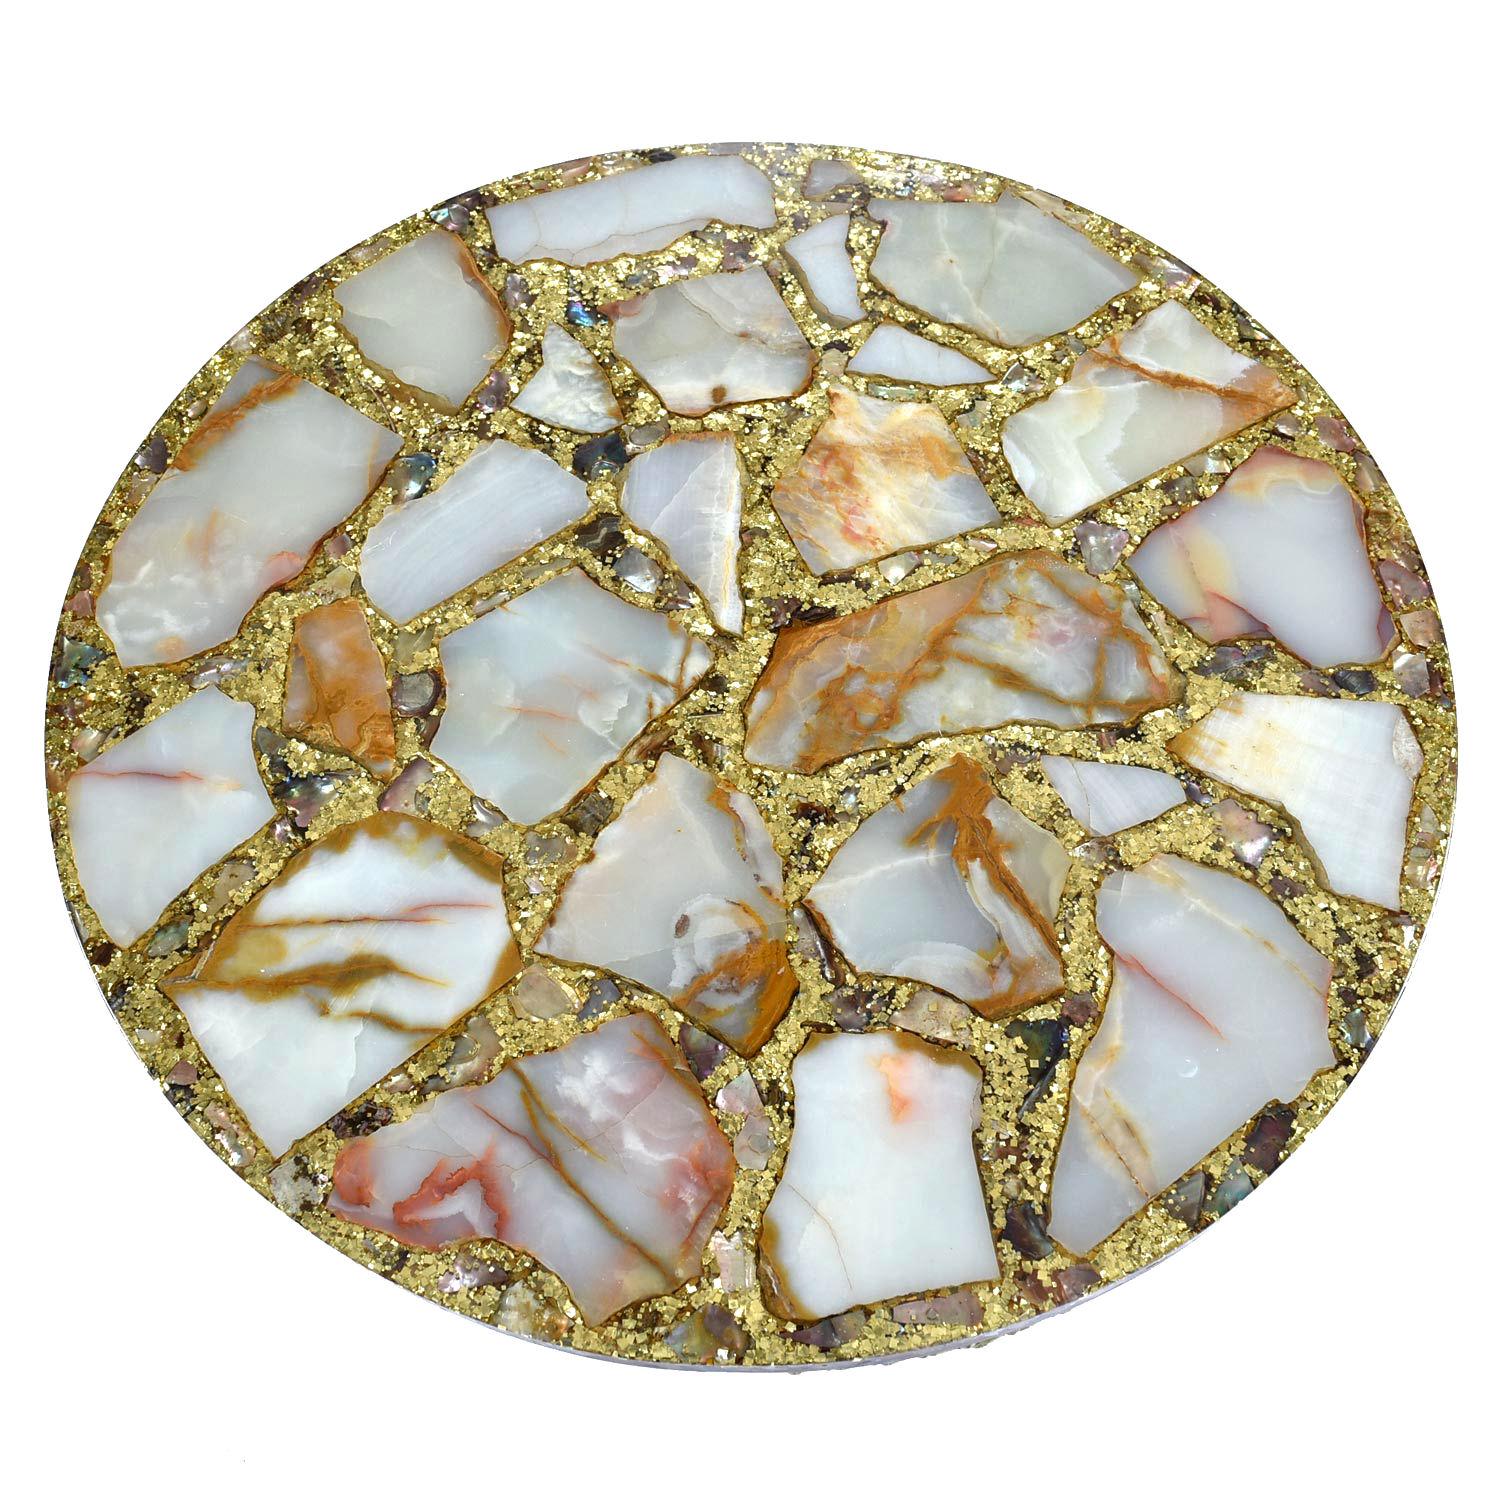 Spectacular round gold glitter and abalone pedestal end table by Arturo Pani. The table features cross sections of cream and copper colored onyx stone floating in a sea of gold glitter and abalone shells cast in resin. Place your face close to the